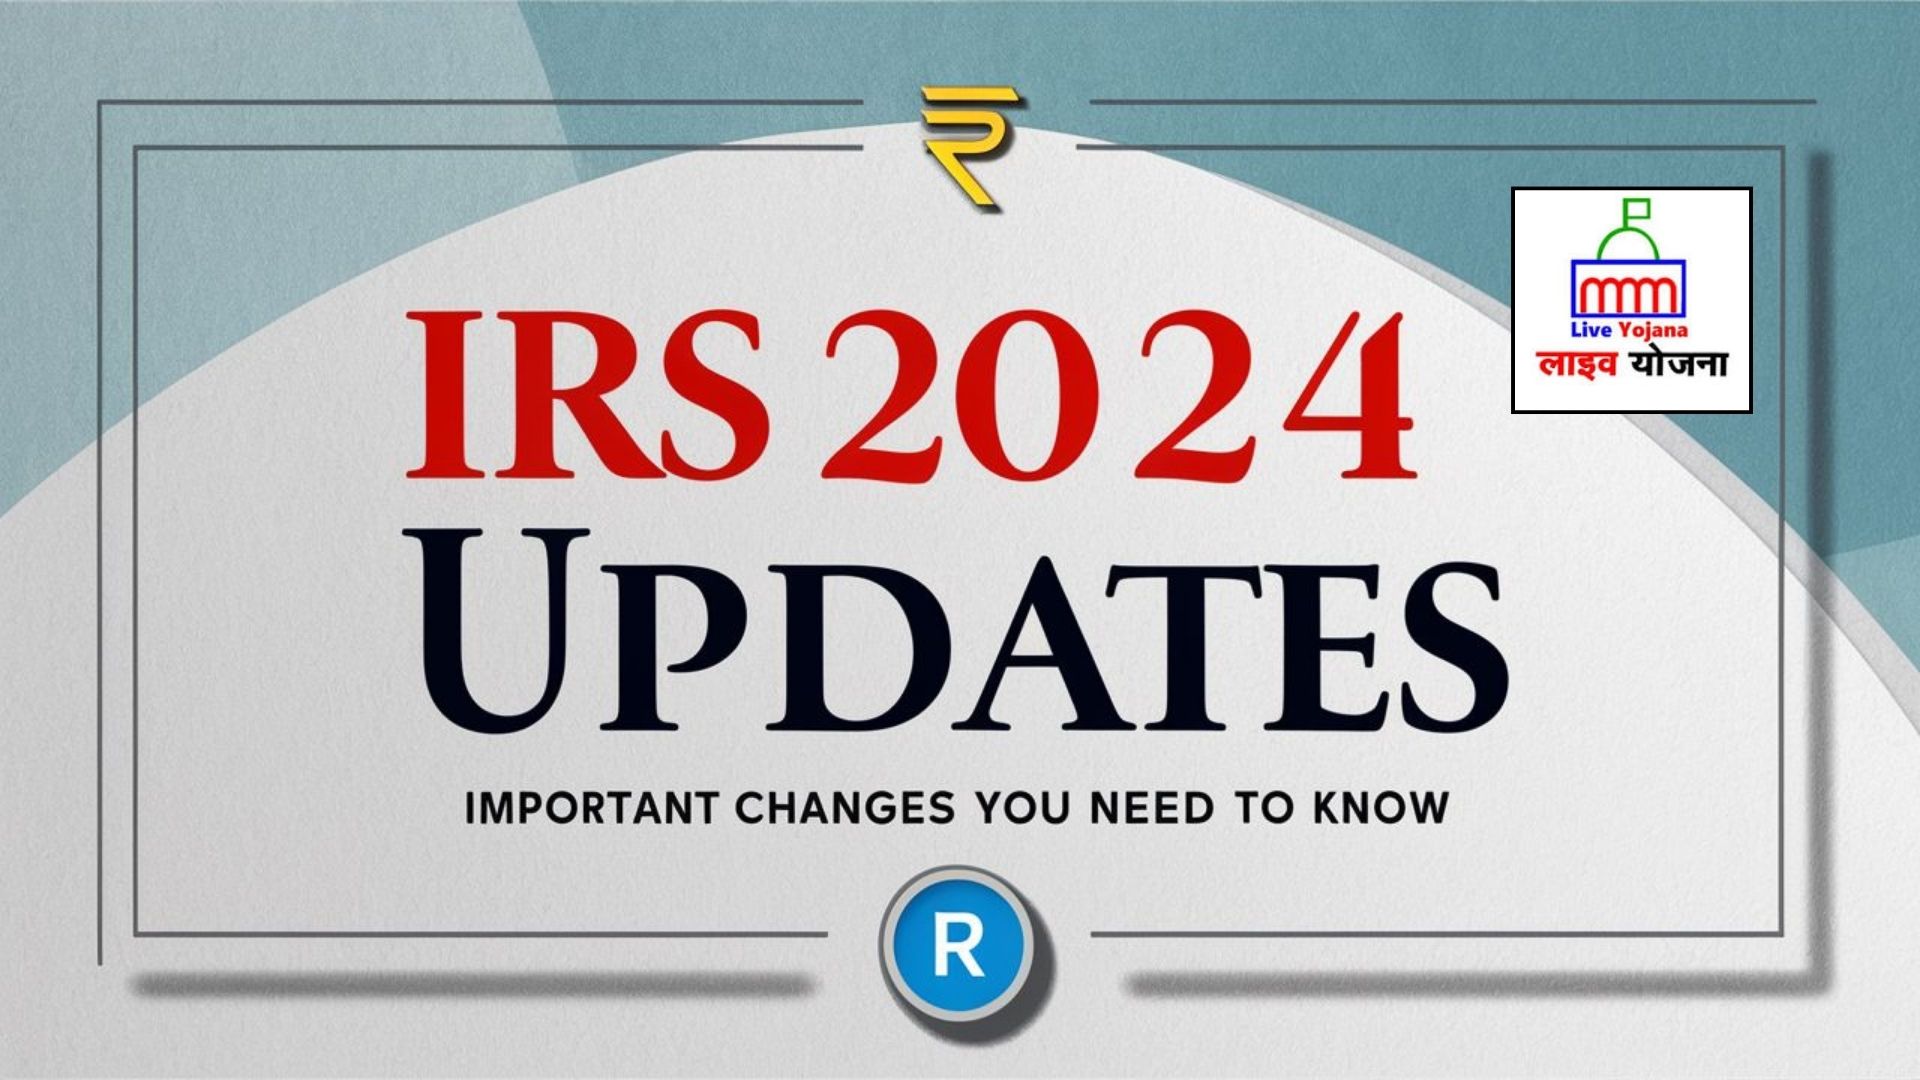 IRS 2024 Updates Insights on Refunds, Child Tax Credit, and SSI